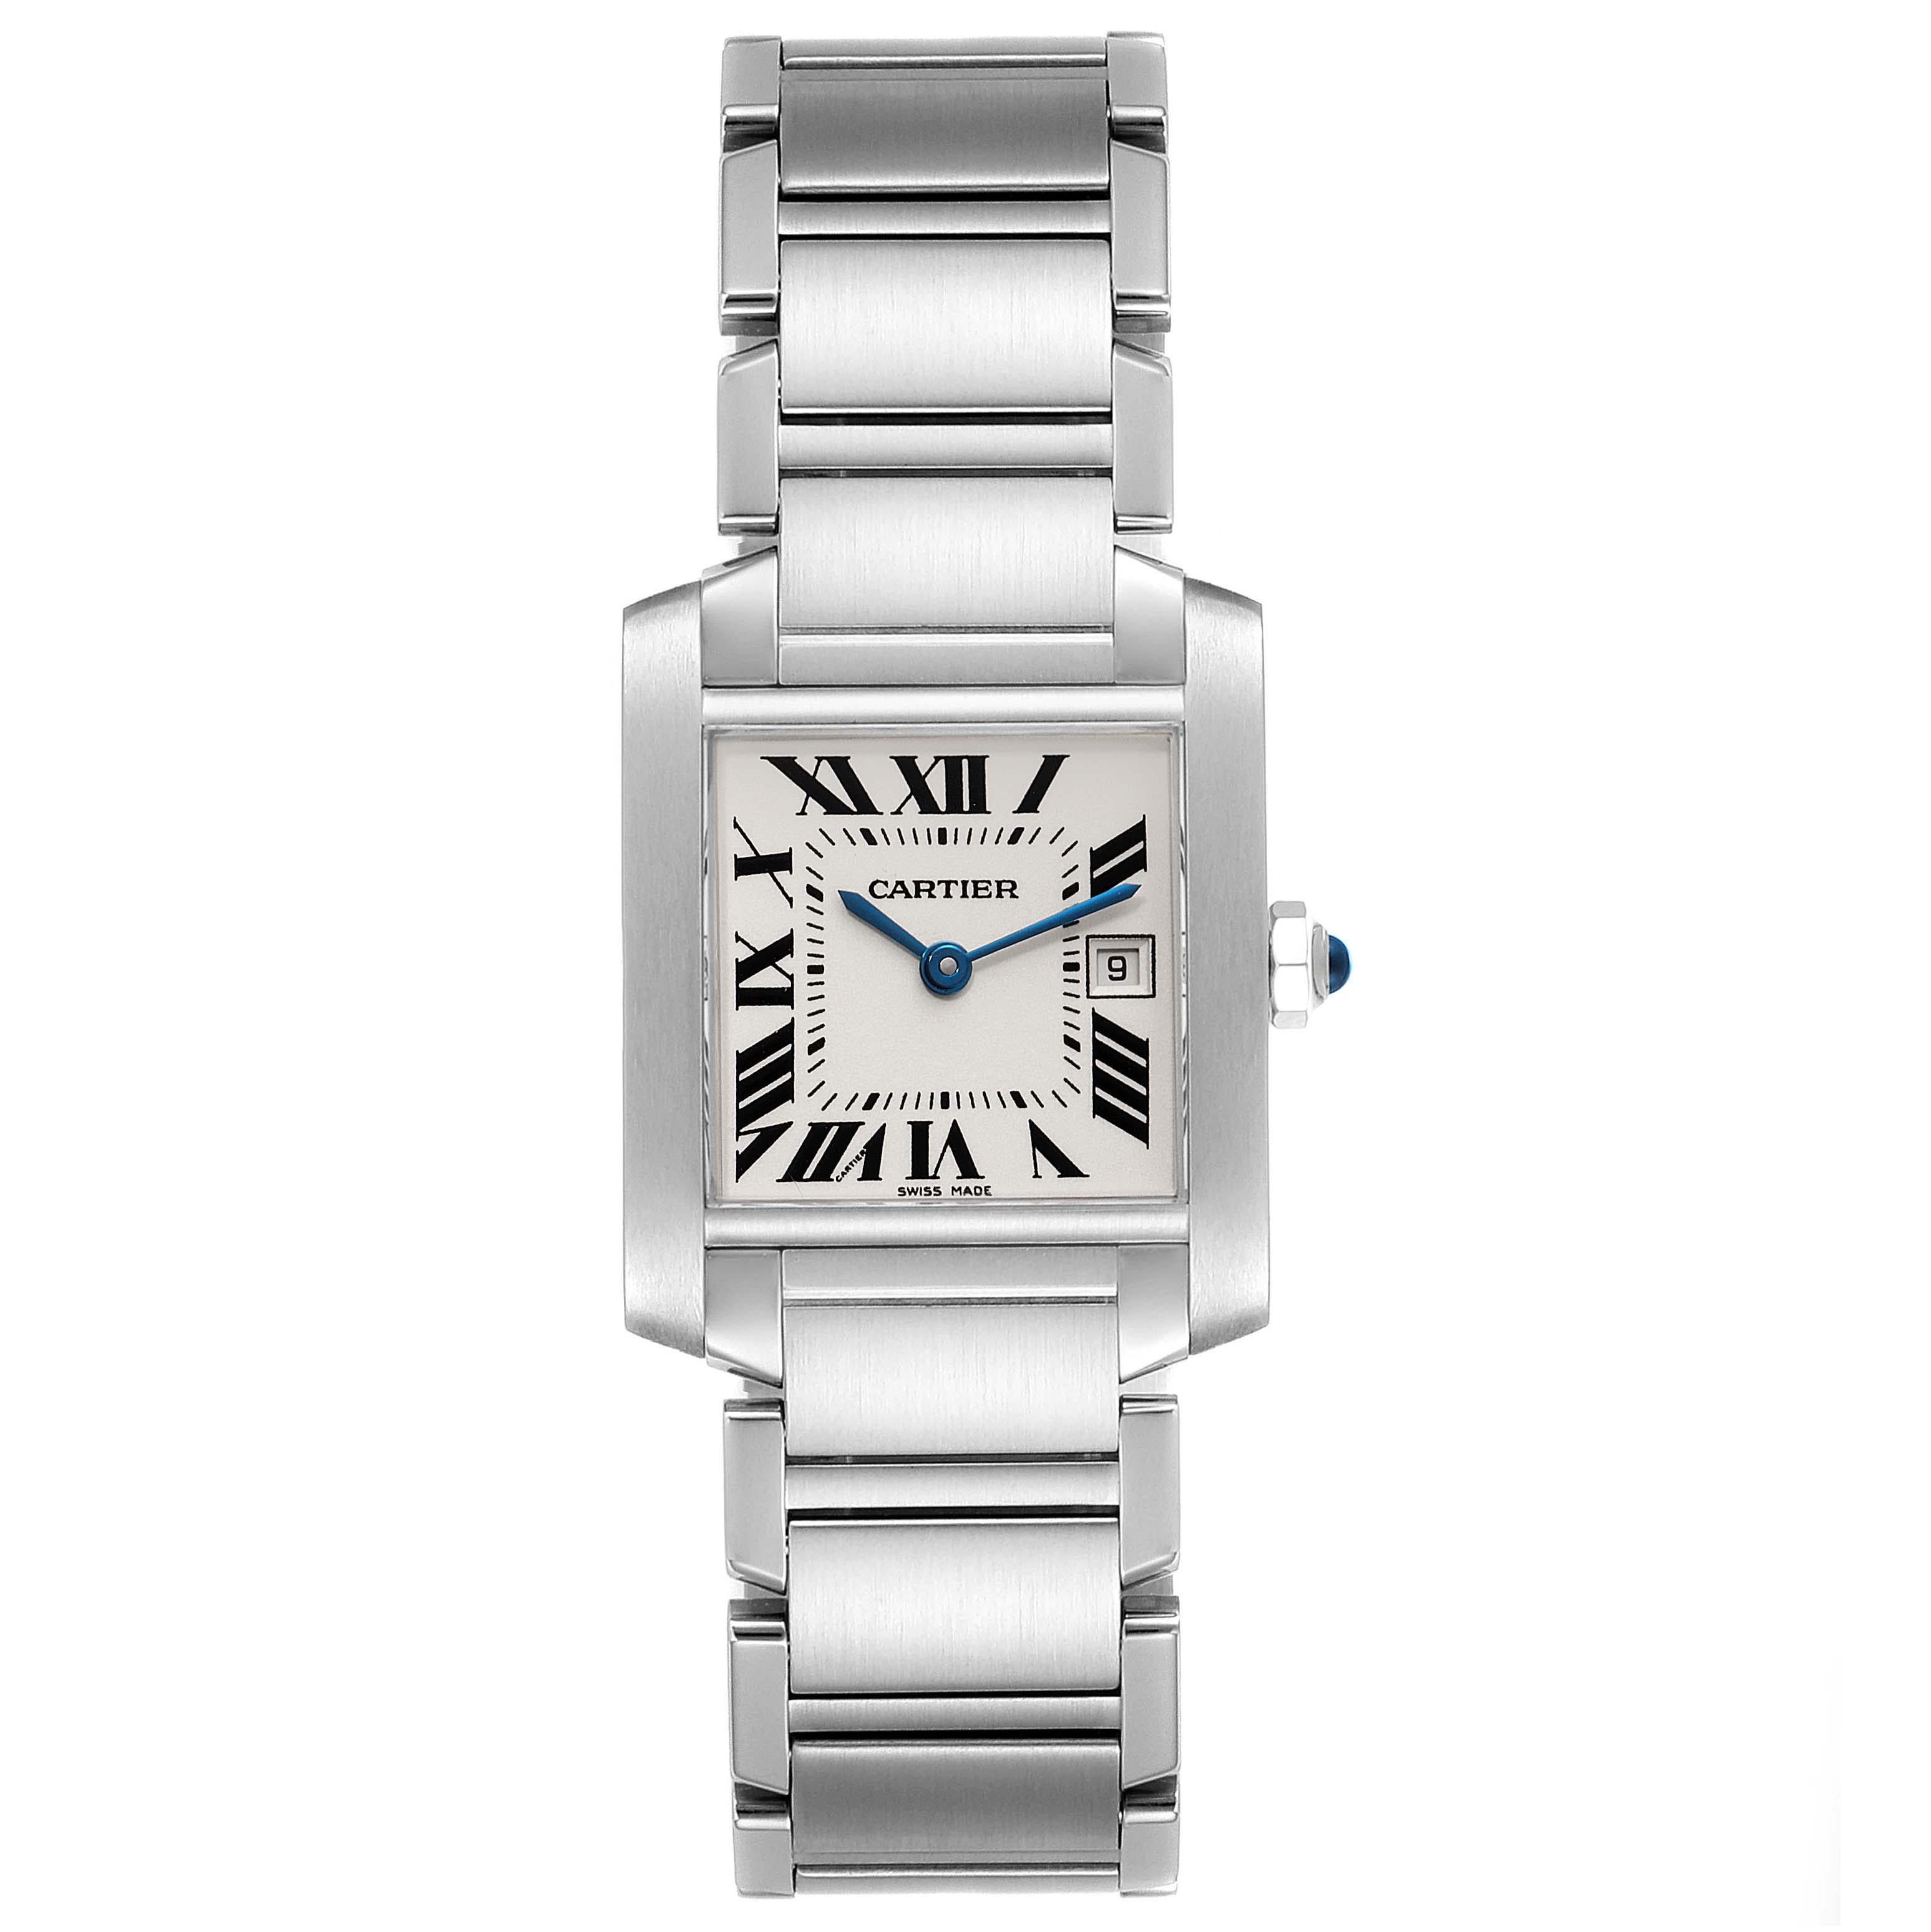 Cartier Tank Francaise Midsize Silver Dial Ladies Watch W51011Q3 In Excellent Condition For Sale In Atlanta, GA